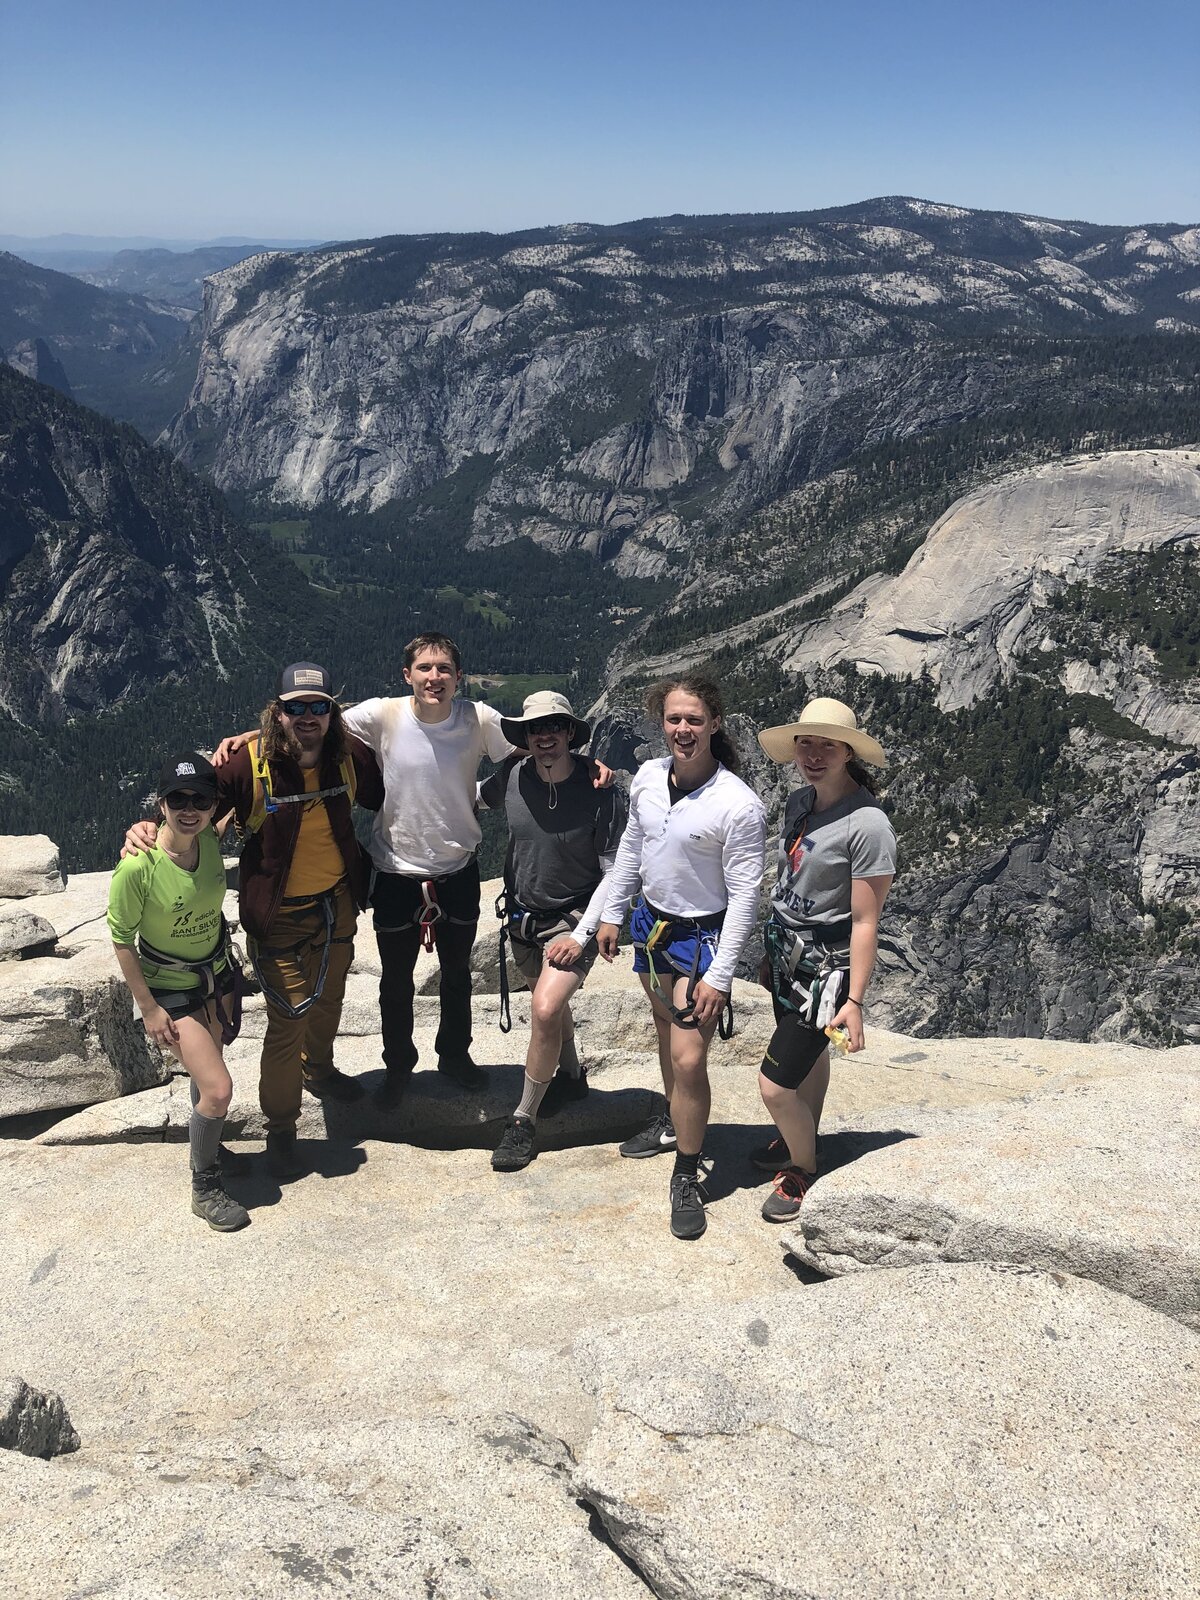 Six people from Miller group atop the Half Dome